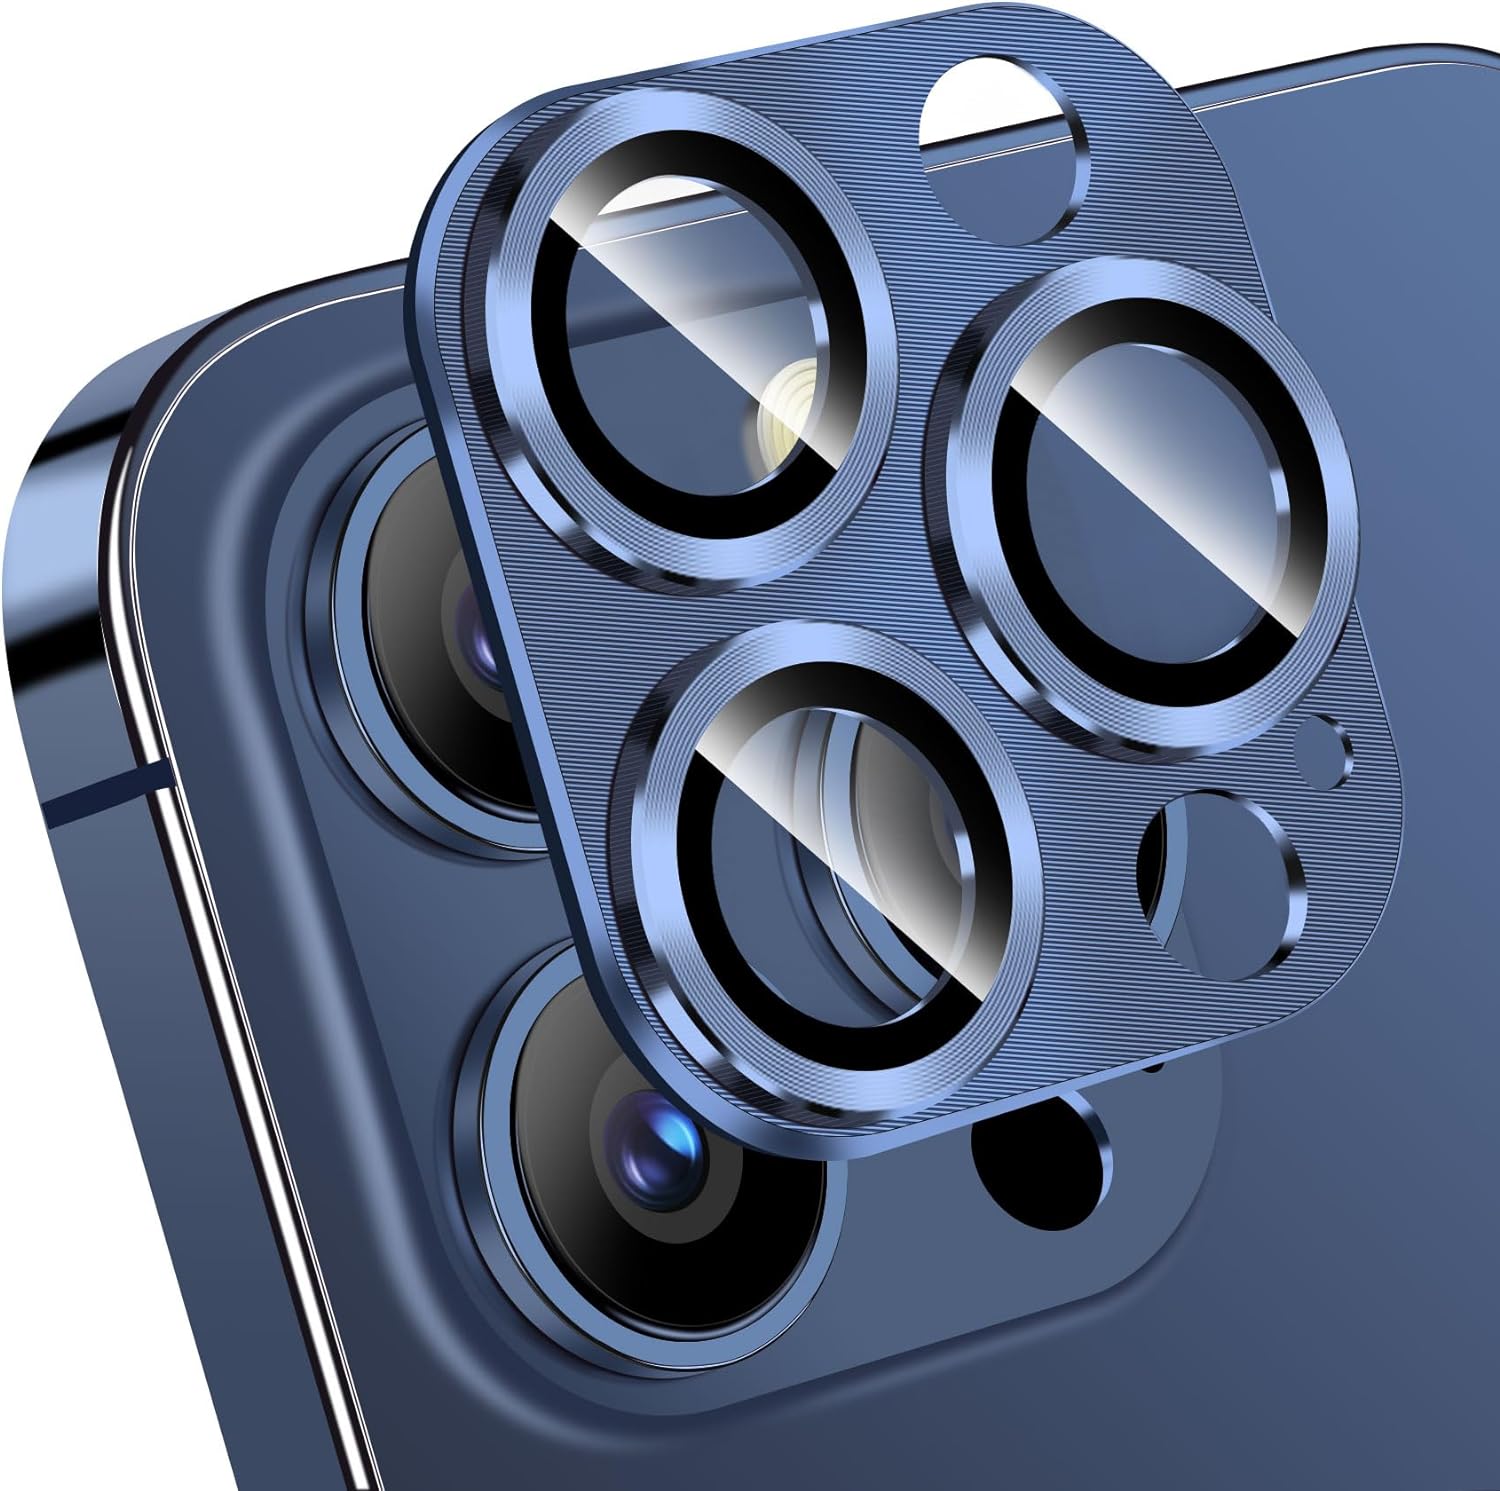 QHOHQ 3 Pack Camera Lens Protector for iPhone 15 Pro Max/iPhone 15 Pro, Zinc Alloy One Piece Camera Cover, [Updated Version], Full Coverage Protection, Ultra HD, Shatterproof - Dark Blue